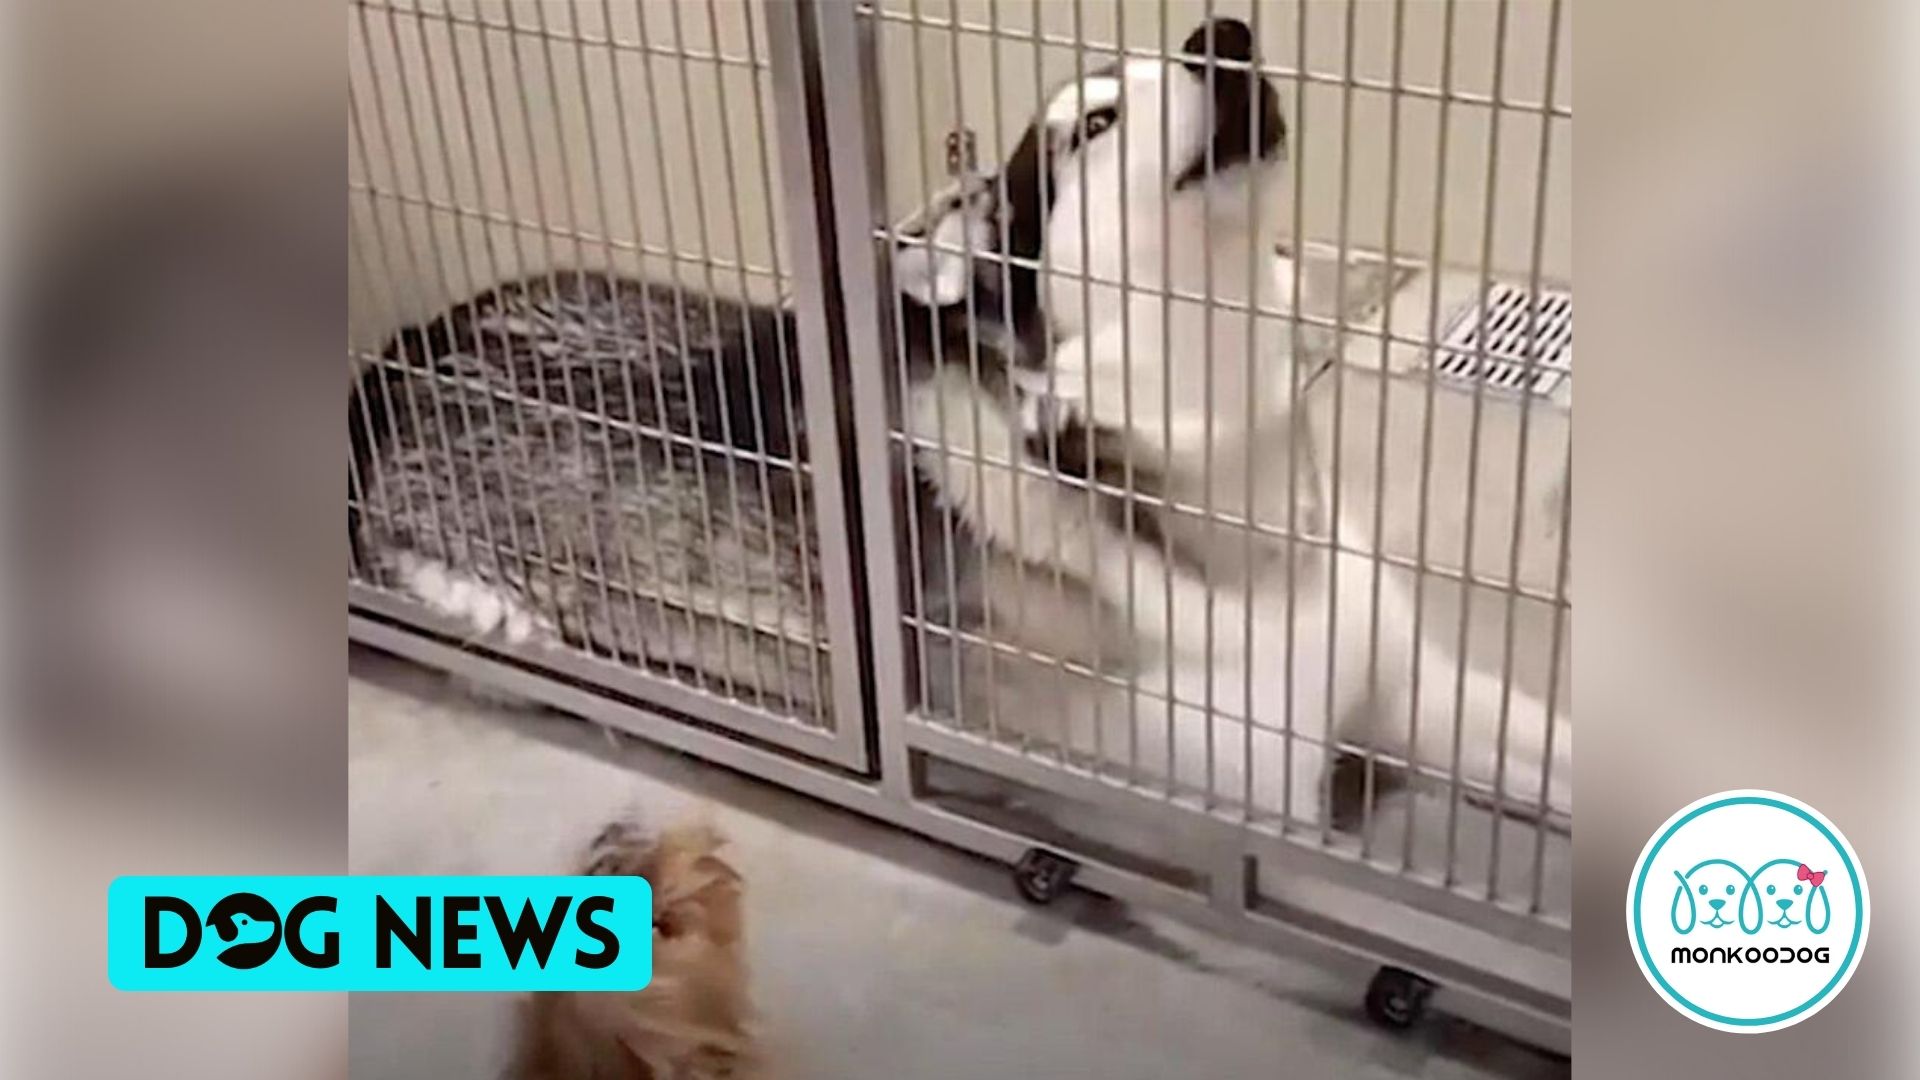 WATCH Dog BFFs Bark, Sing, and Dance Together at Doggie Daycare Reunion After 18 Months Apart